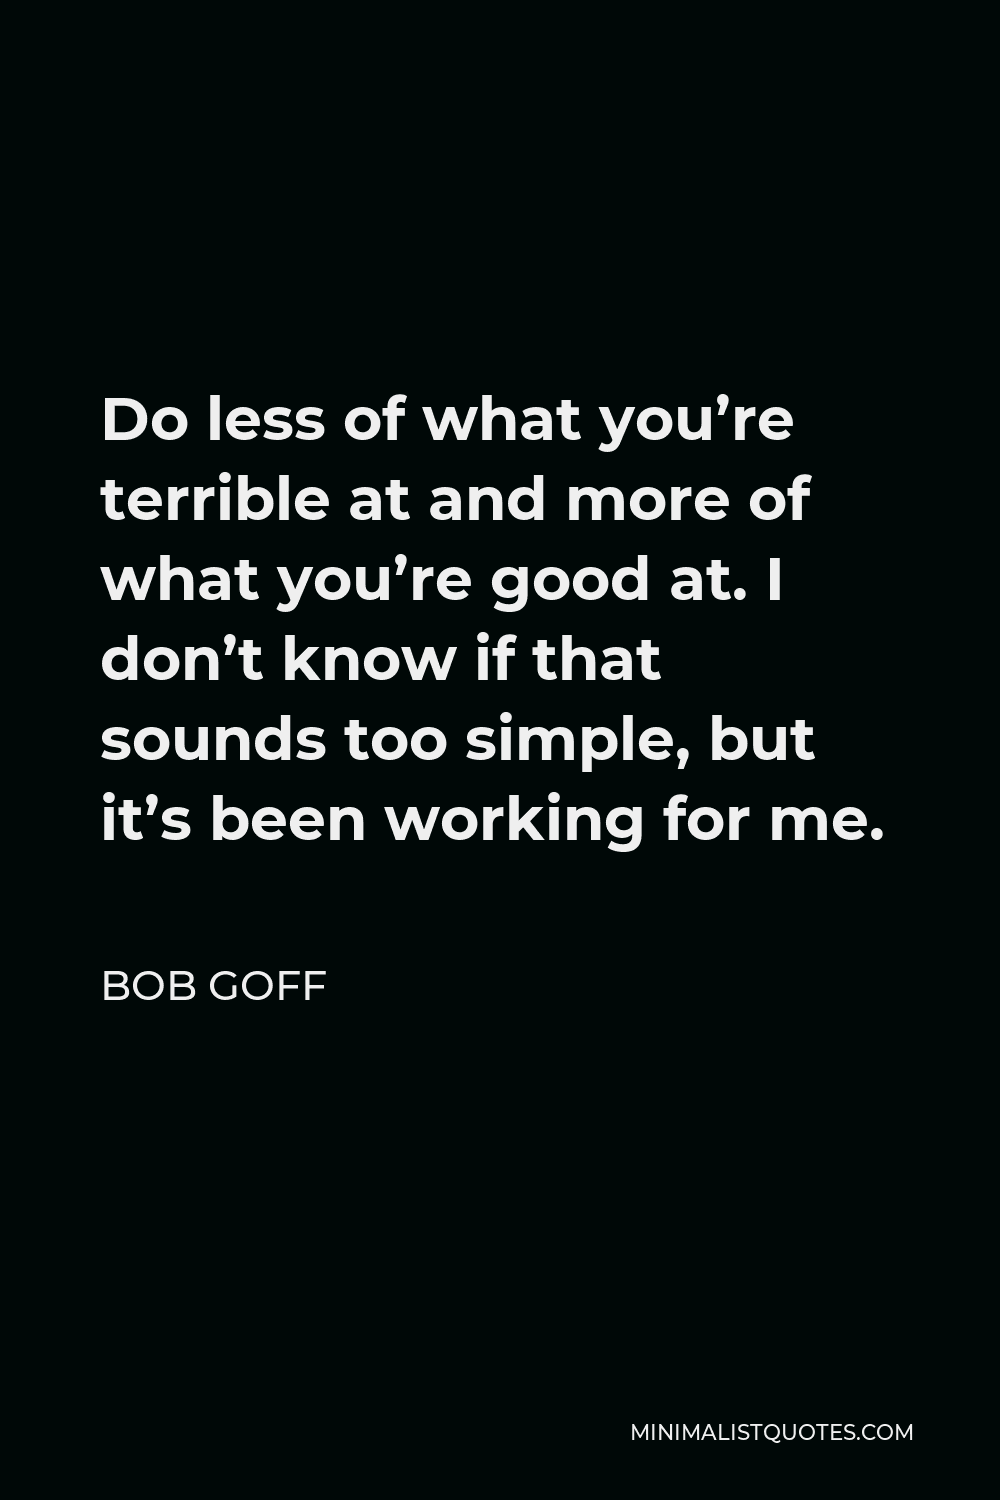 Bob Goff Quote - Do less of what you’re terrible at and more of what you’re good at. I don’t know if that sounds too simple, but it’s been working for me.